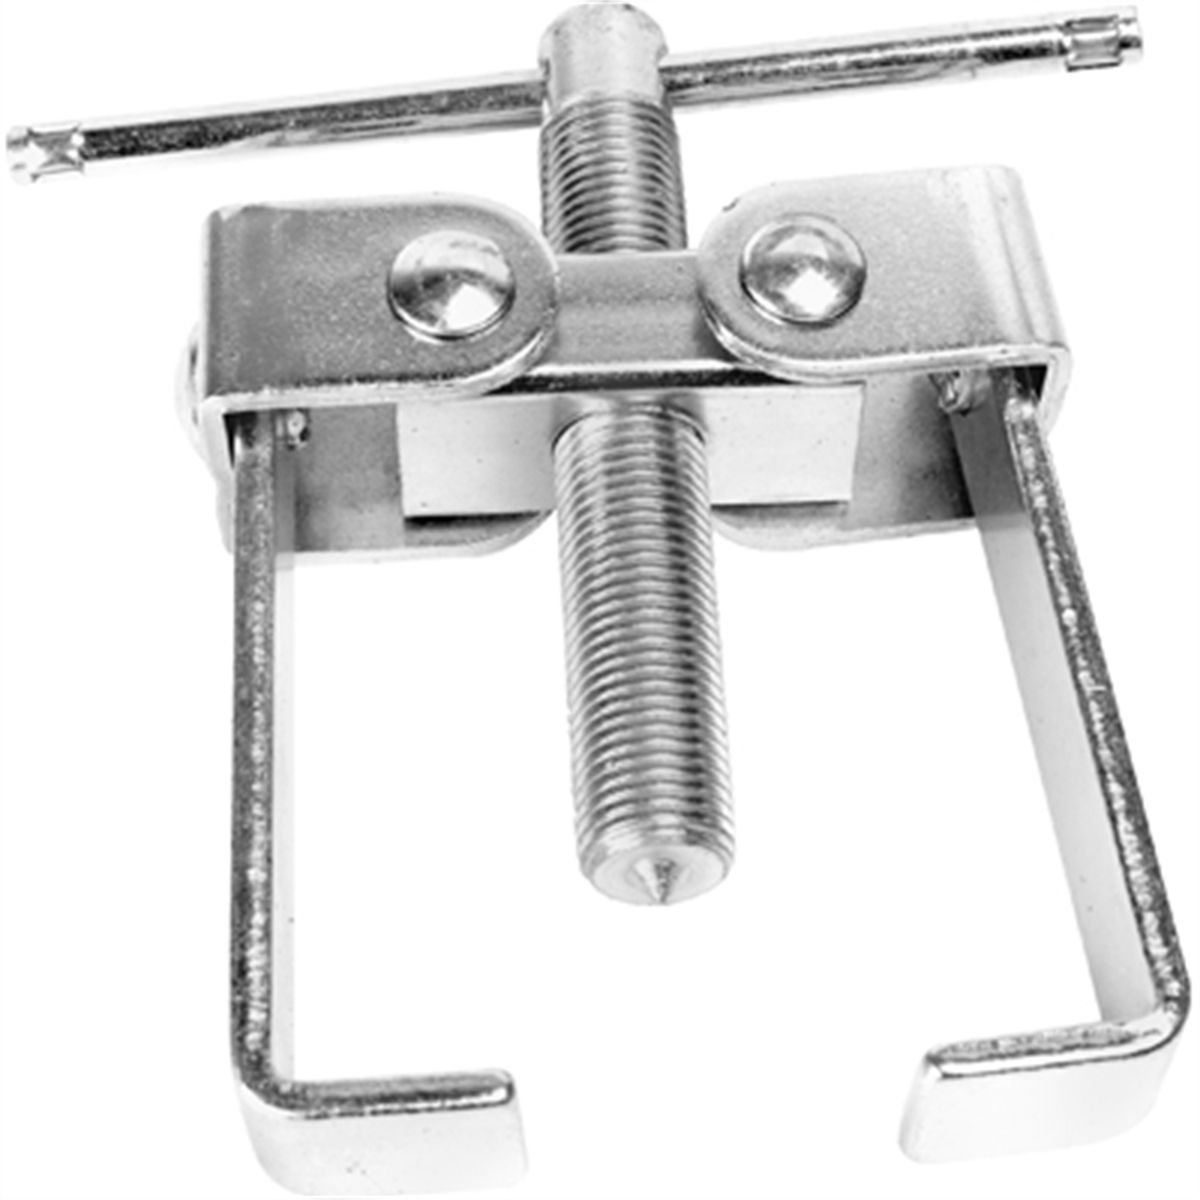 PERFORMANCE TOOL SMALL 2 JAW GEAR PULLER W140 WILMAR 